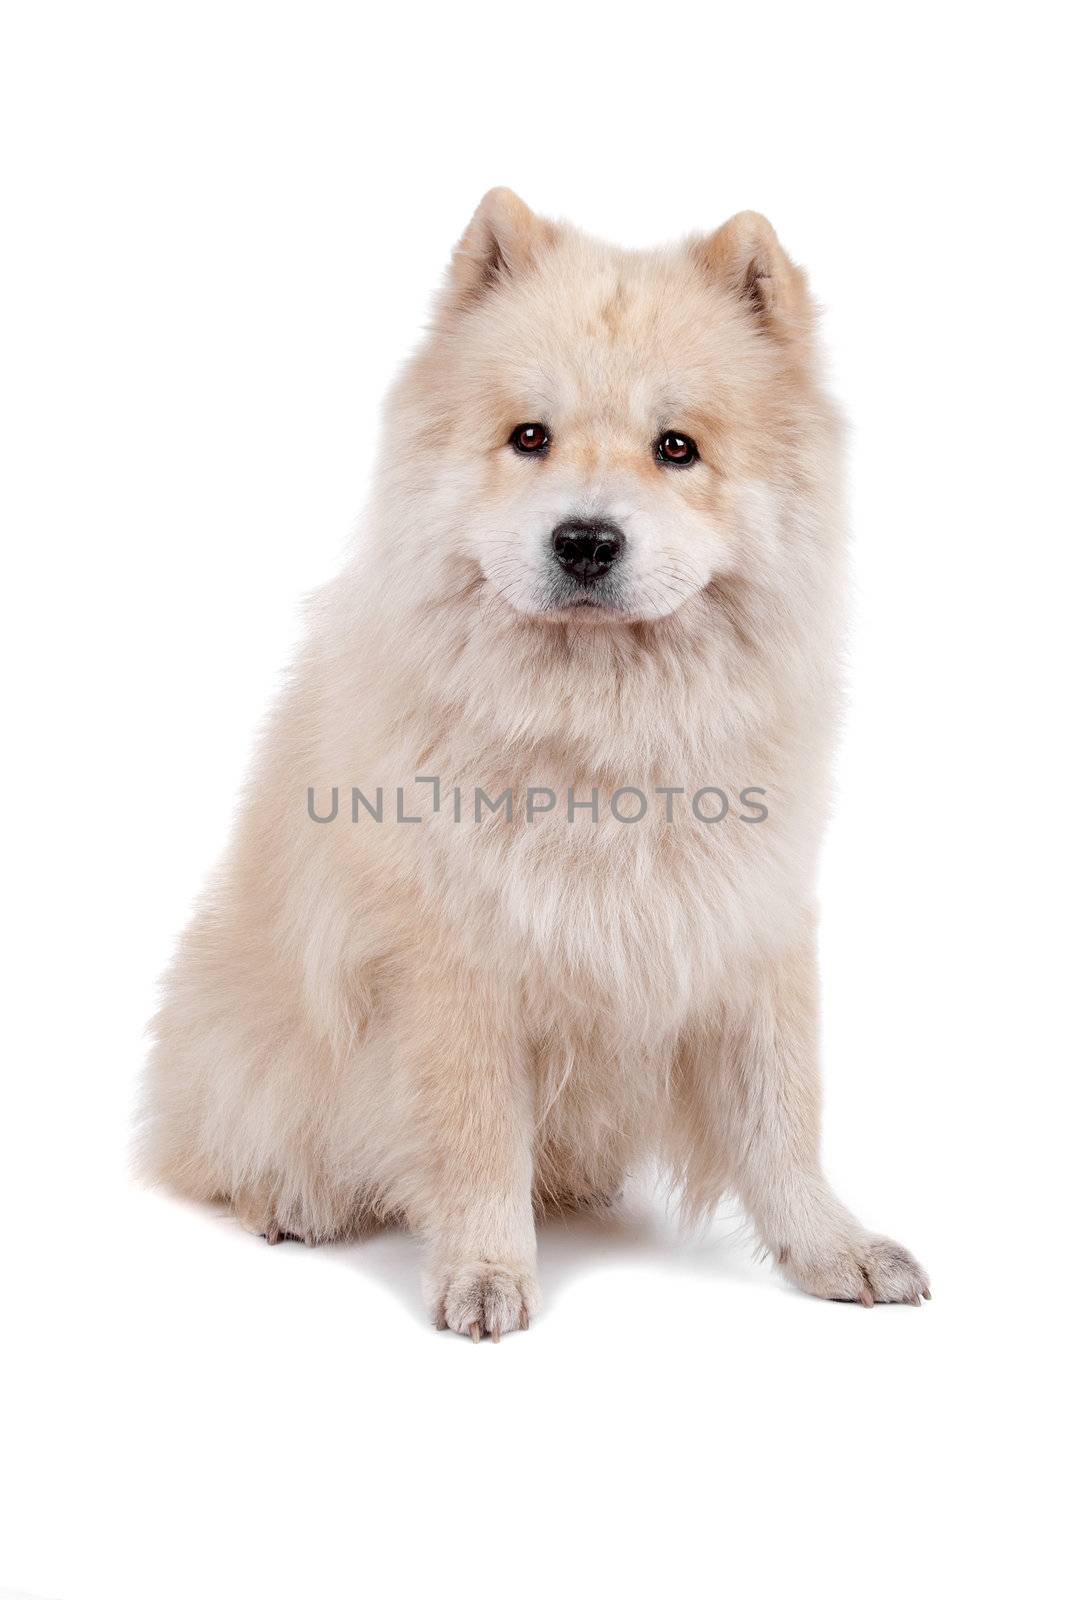 Cute mixed breed dog Chow-Chow and Samoyed sitting and looking, isolated on a white background